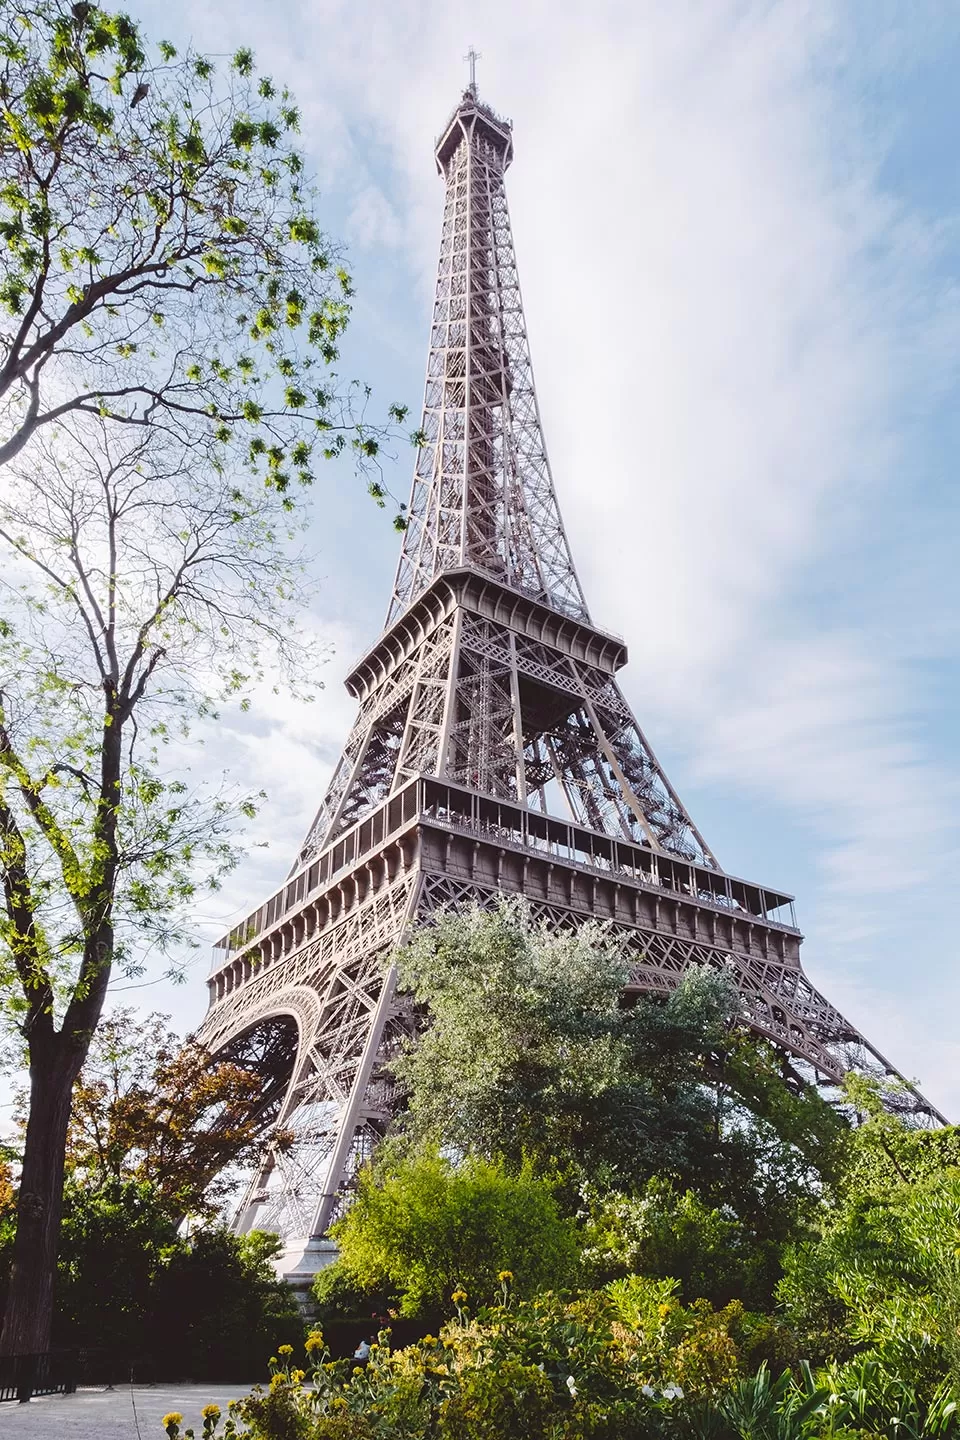 paris itinerary 4 days - what to do in paris in 4 days - eiffel tower